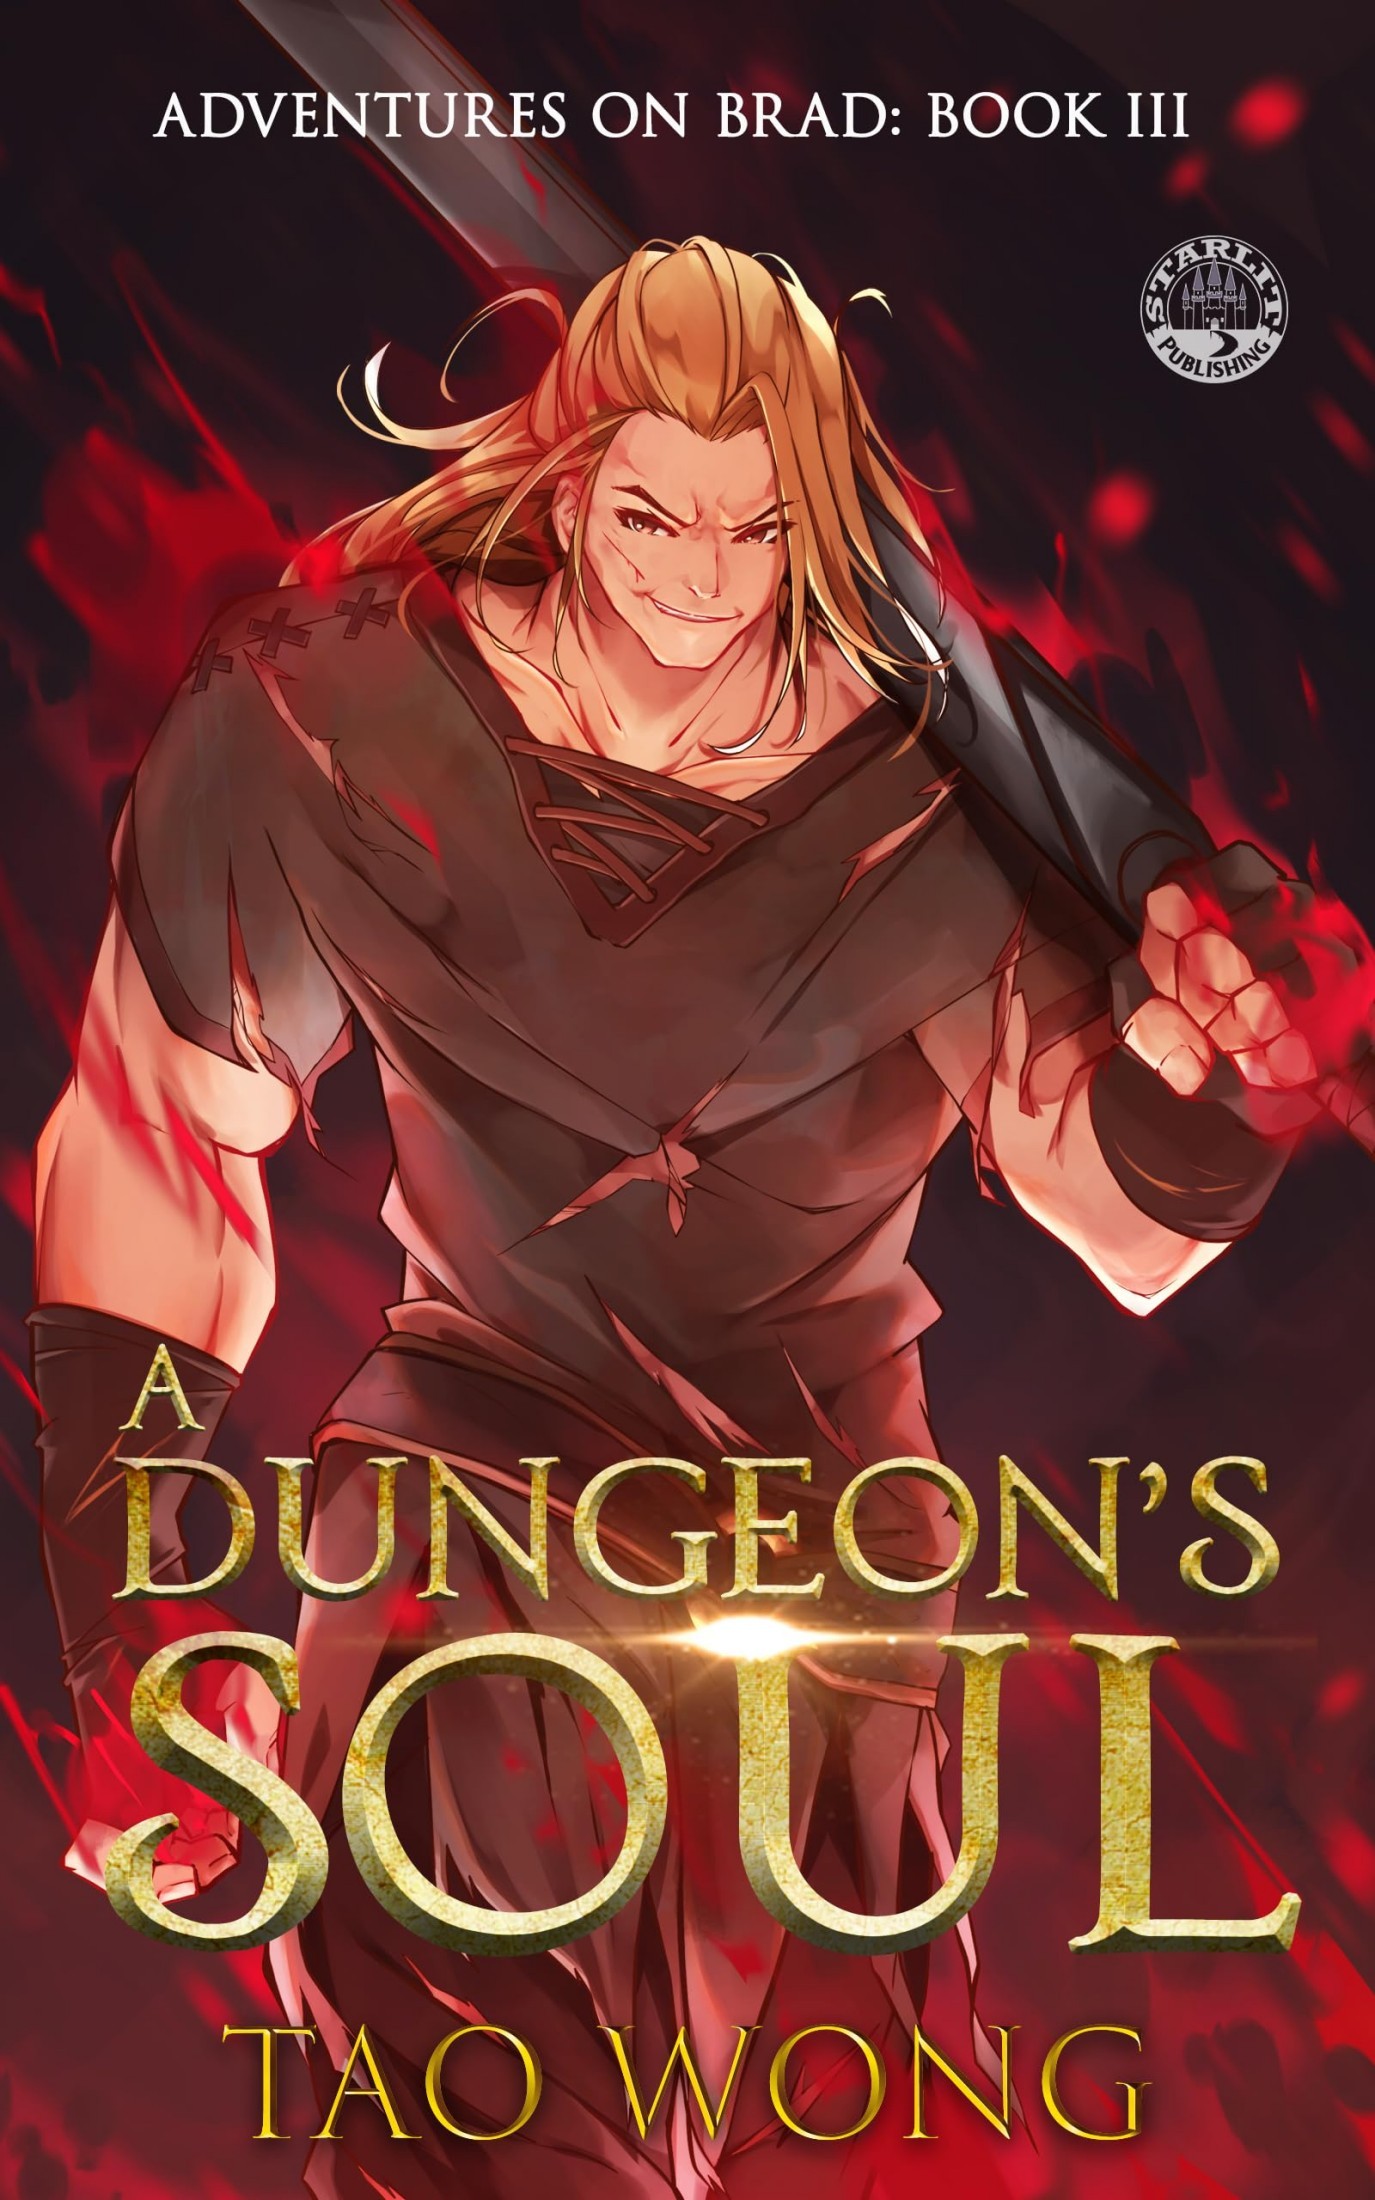 A Dungeon's Soul